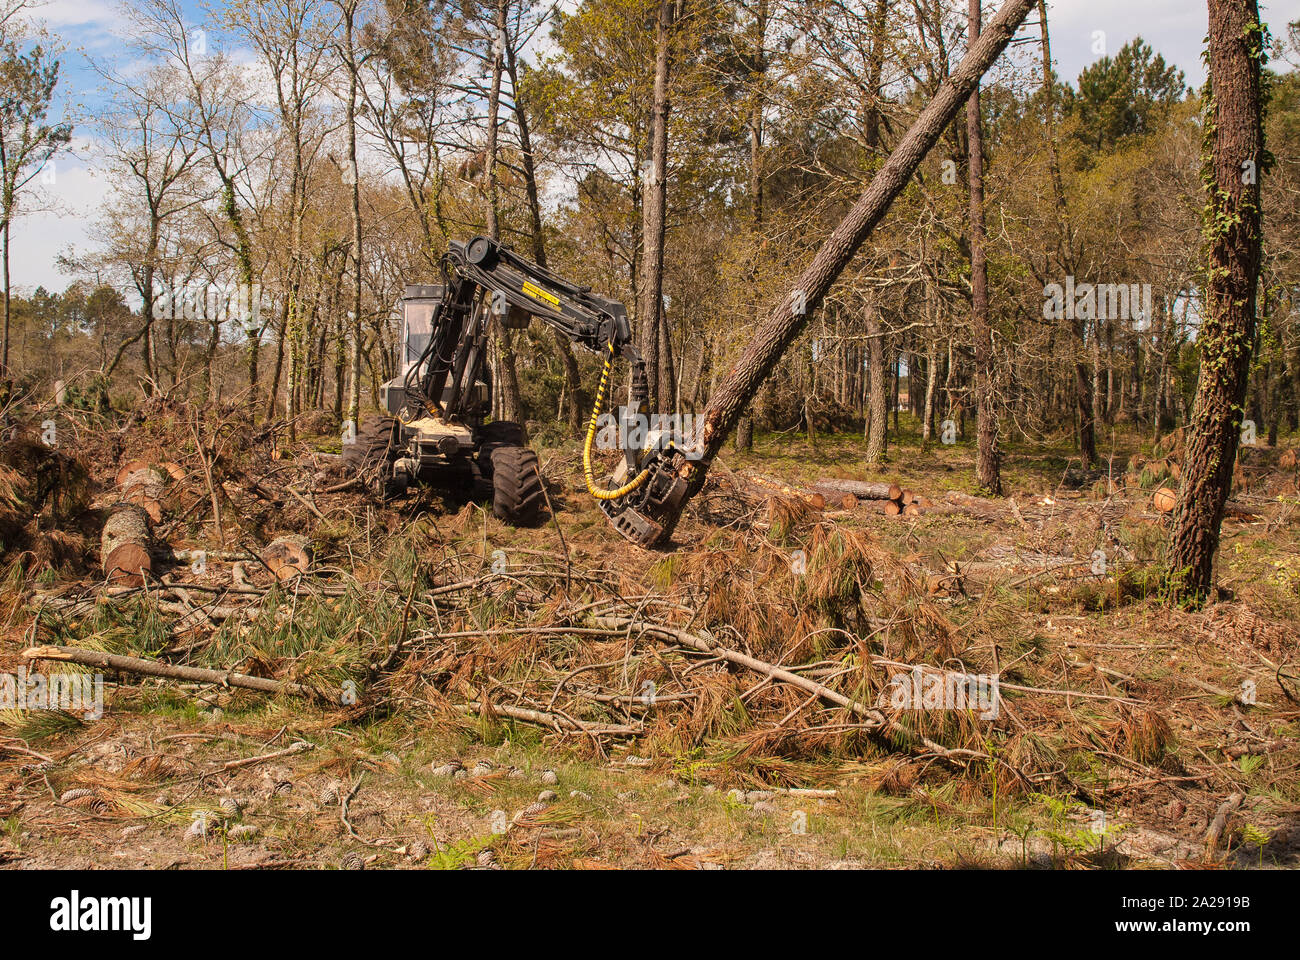 Heavy machinery cutting down trees in a forest Stock Photo